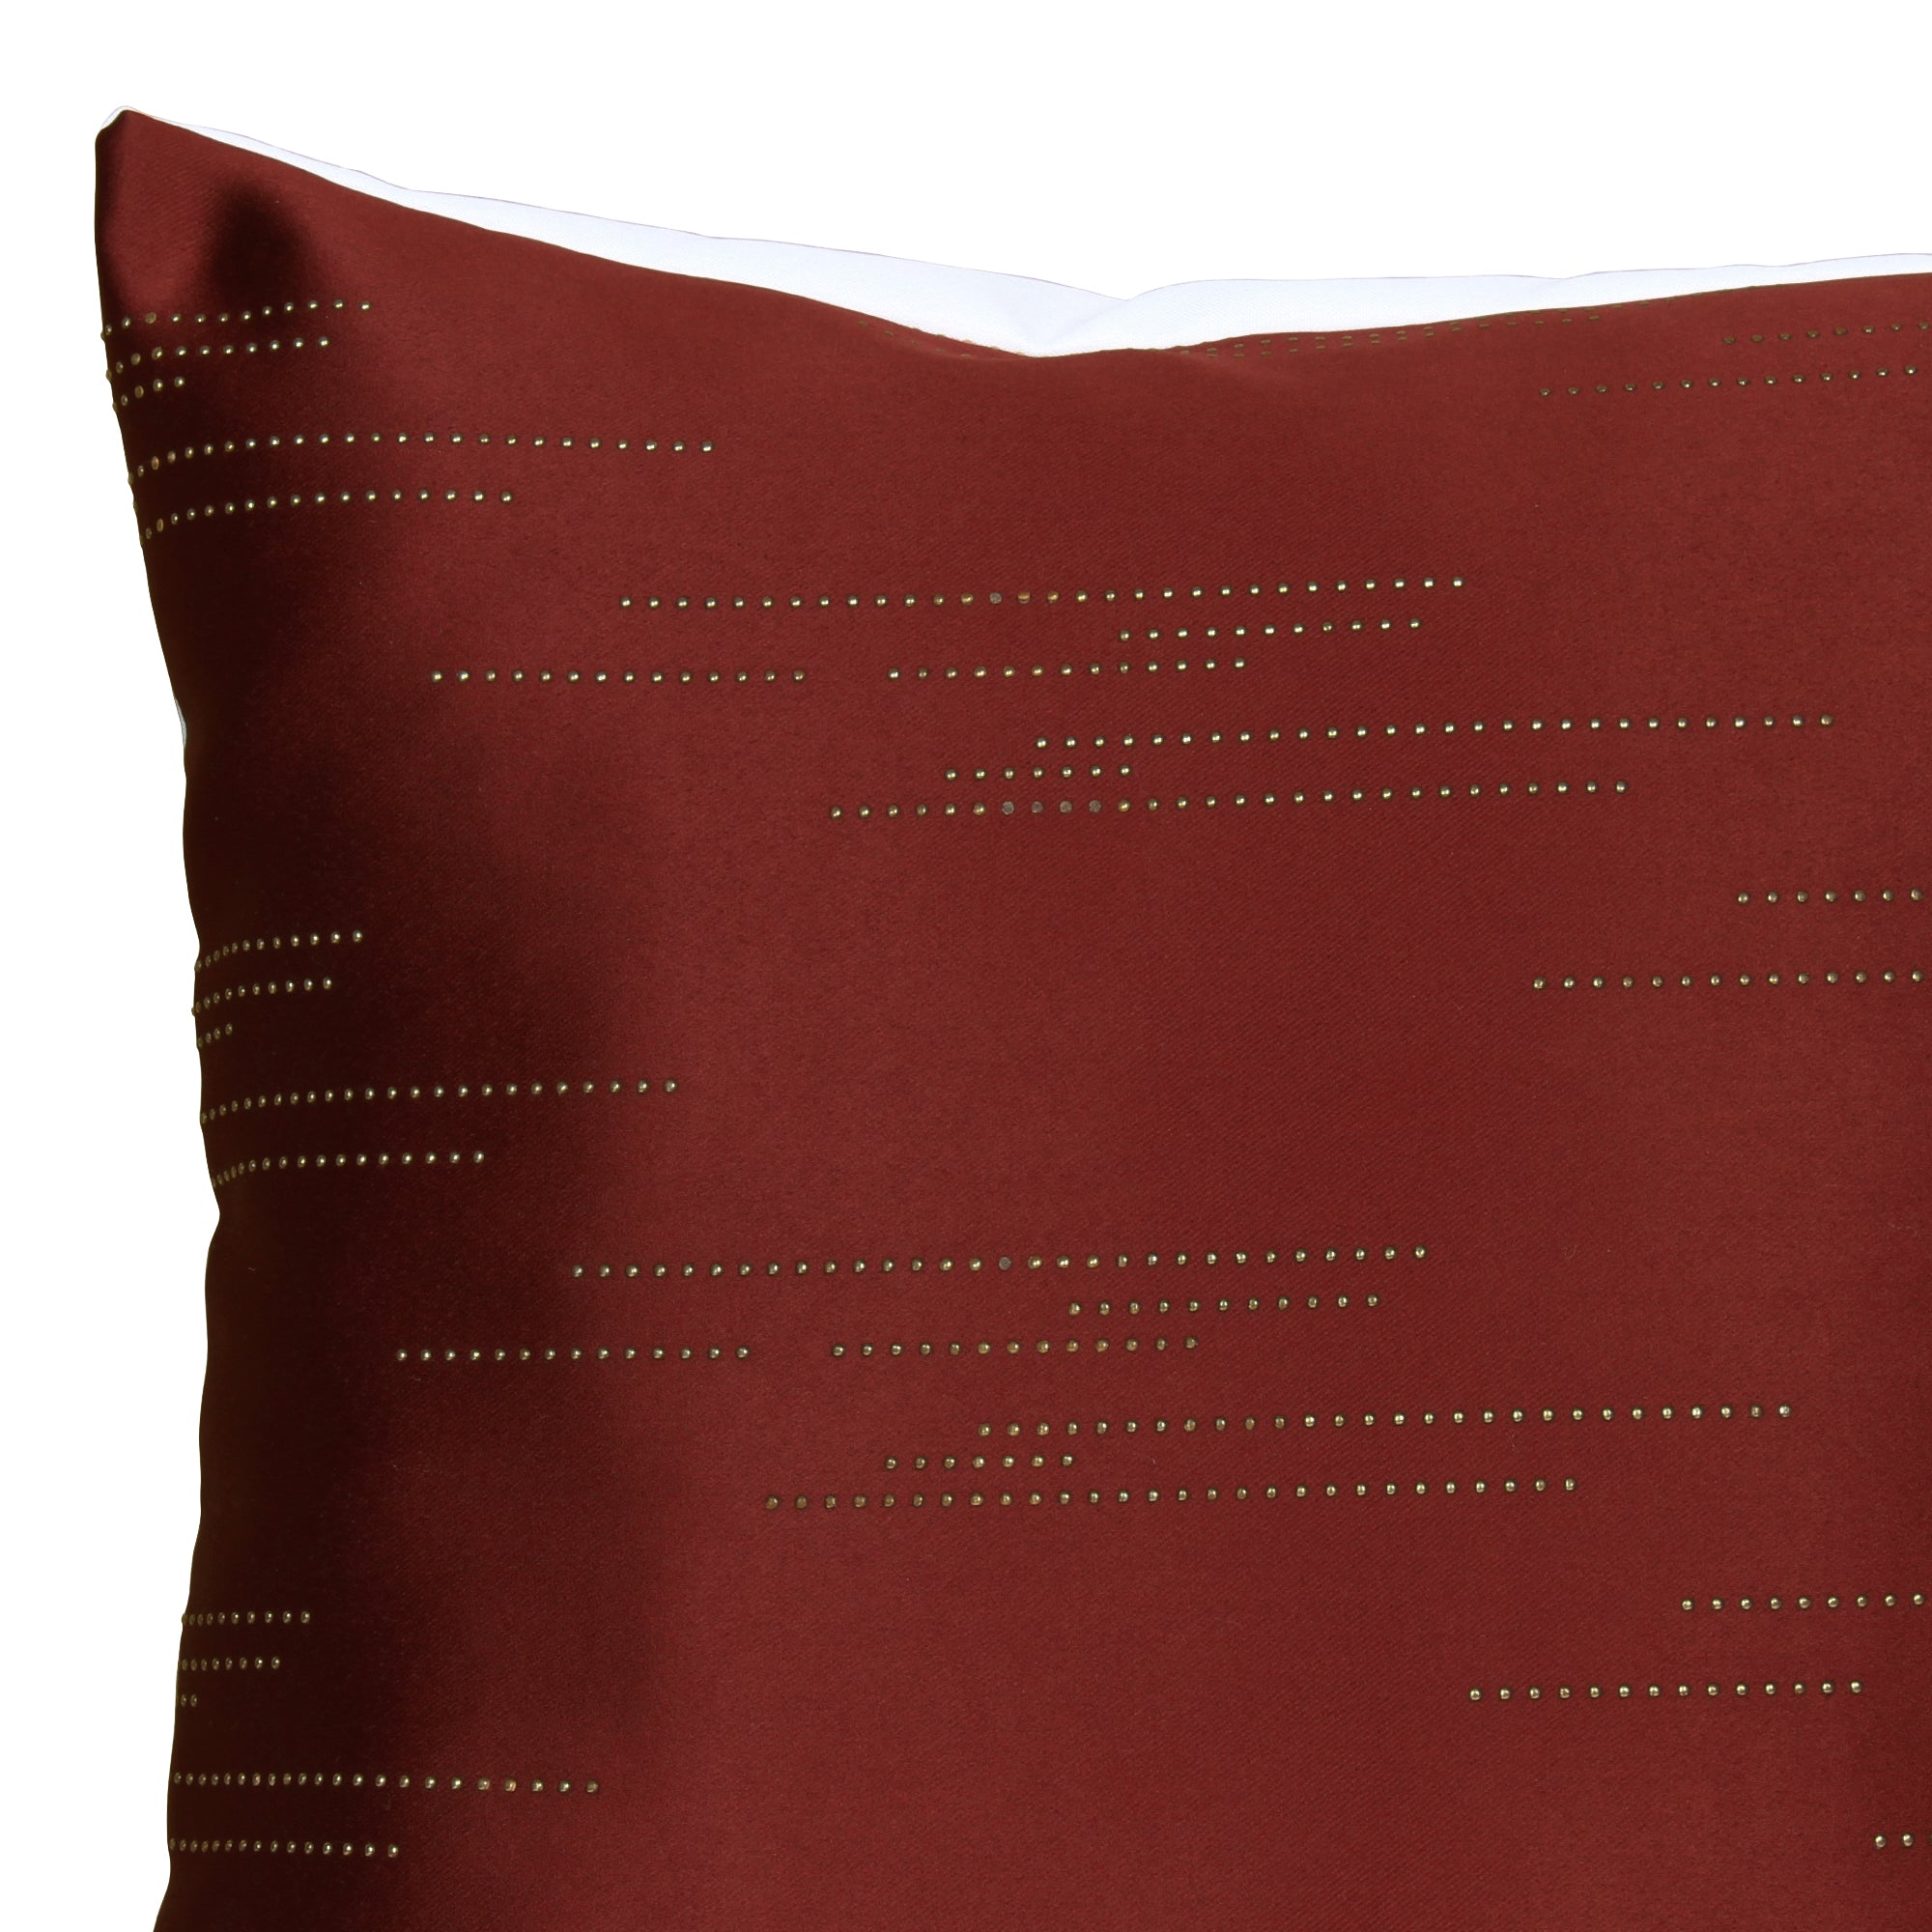 ALEGRA CUSHION COVERS 16 x 16 - RED COLOR